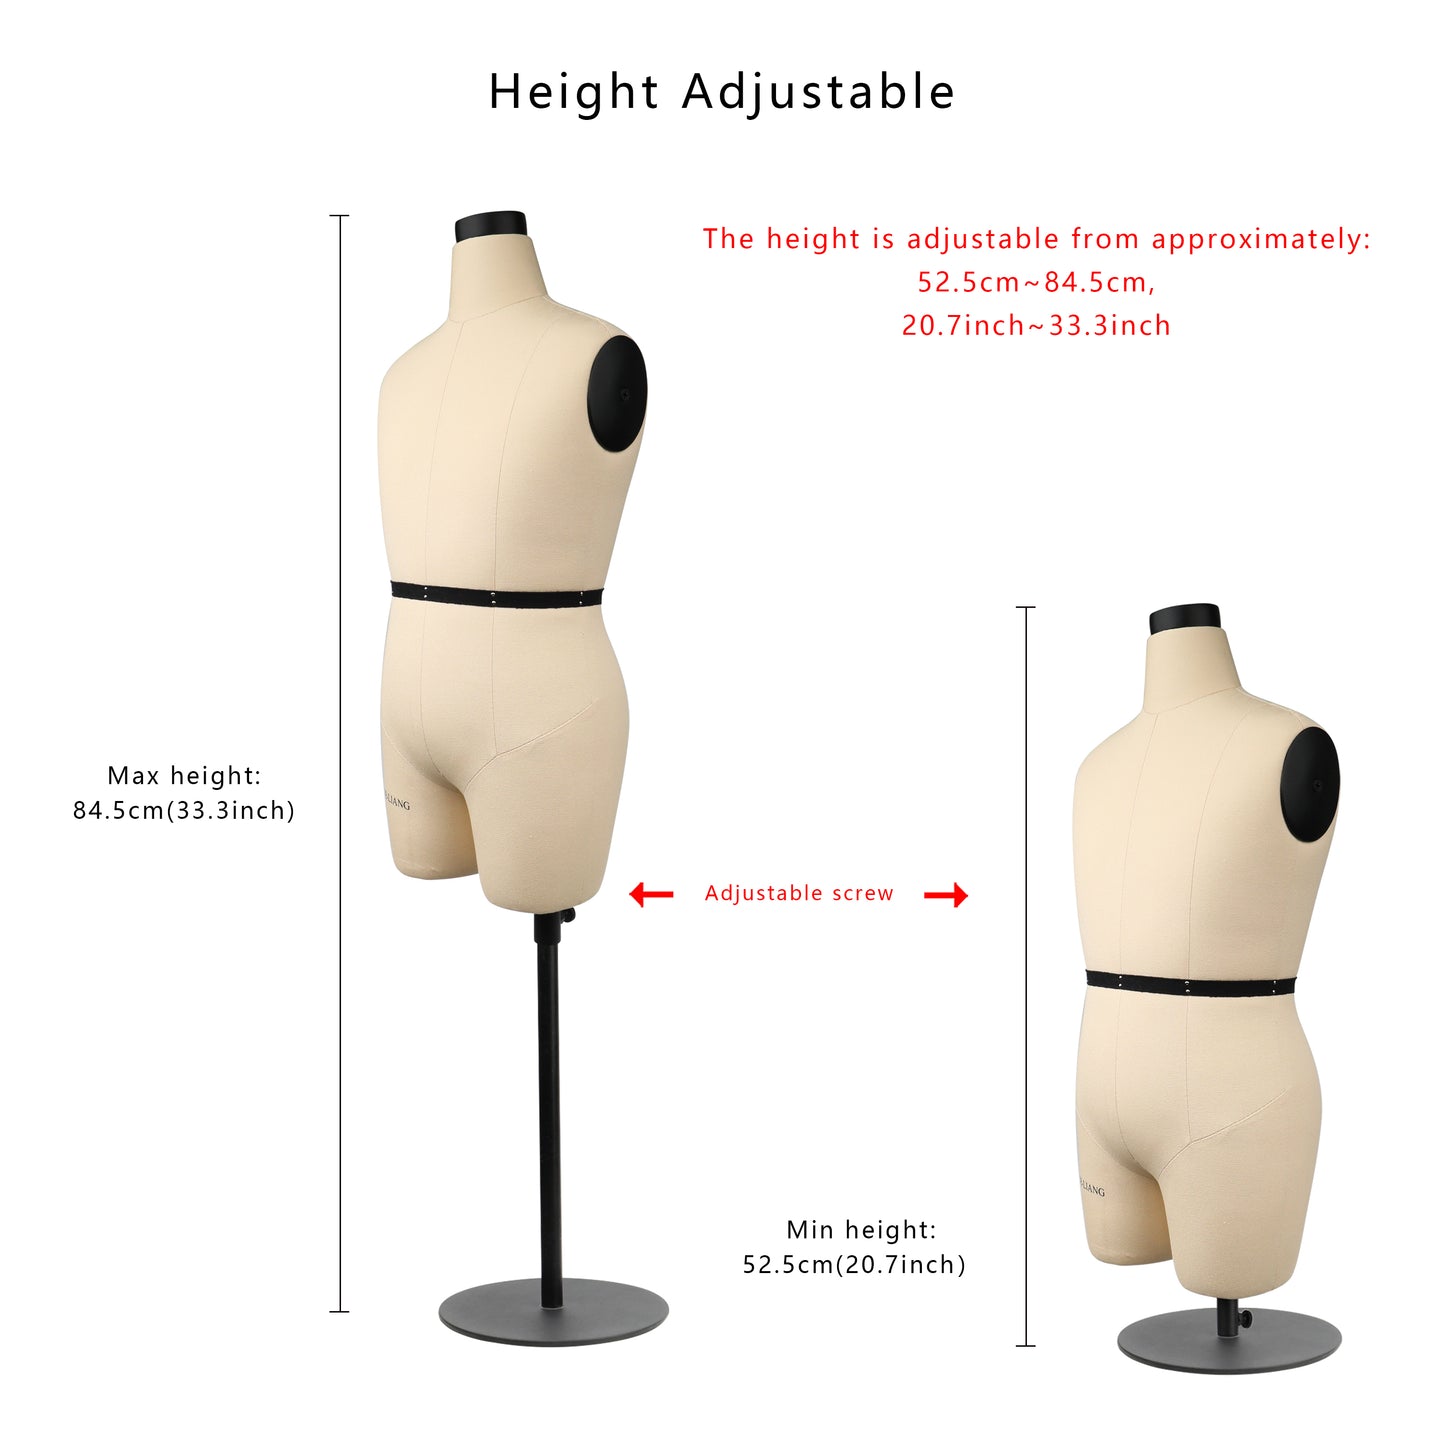 DL264 Half Scale Men Dress Form 1/2 Male tailor dummy trouser Mannequin with 32cm soft arms,half size male sewing form,48cm fitting form